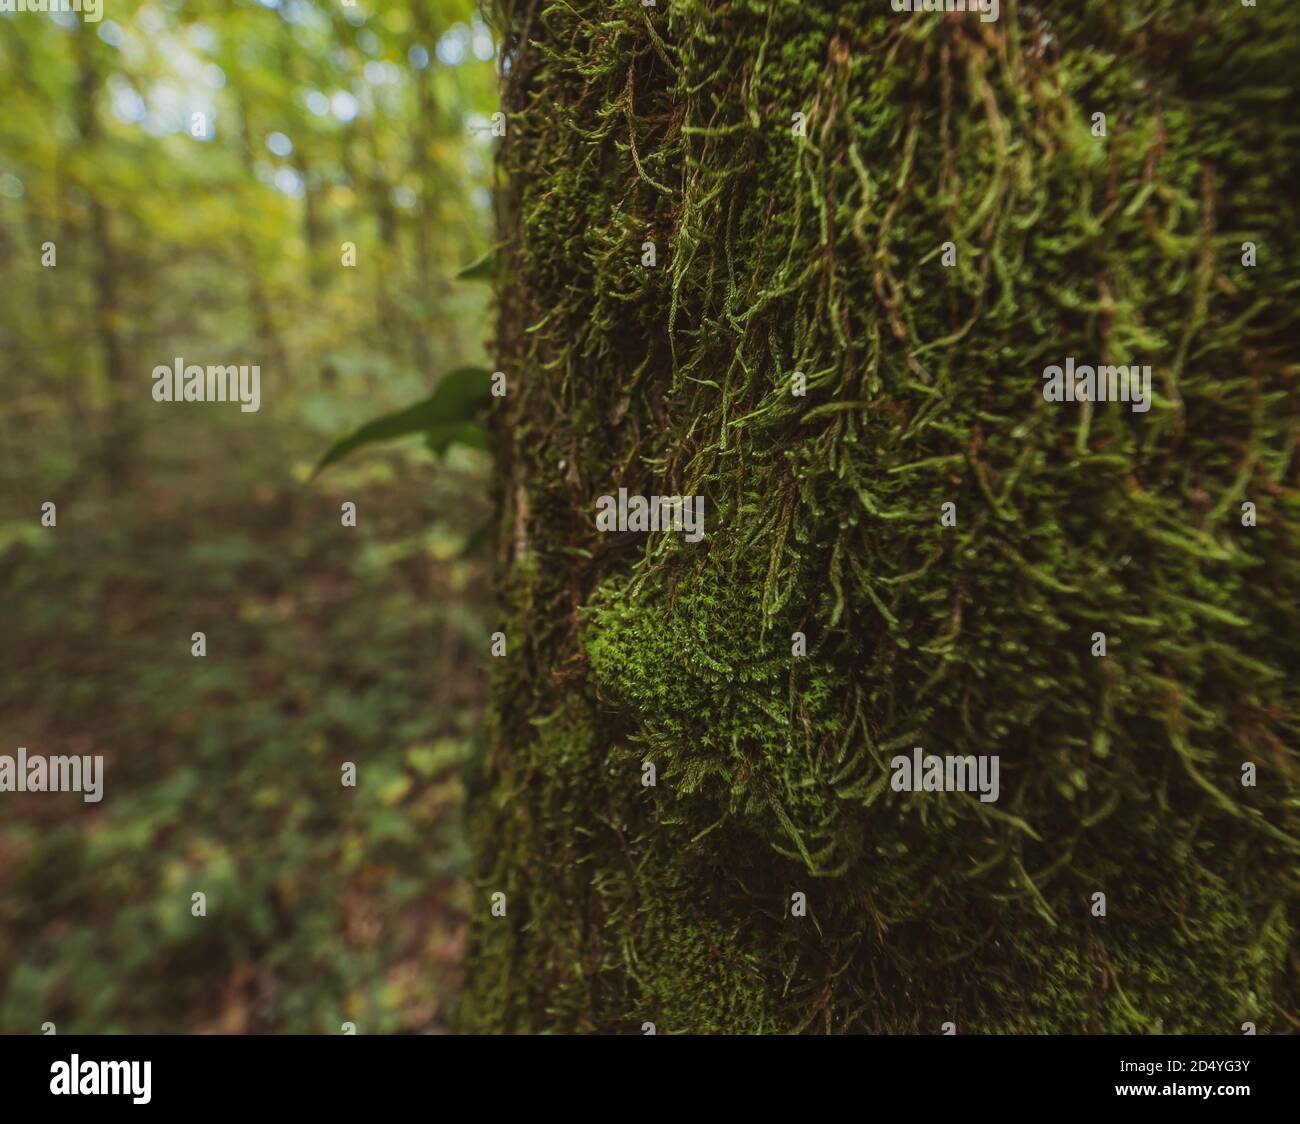 Close up of moss growing on a tree trunk in a misty atmospheric autumn fall forest. Stock Photo